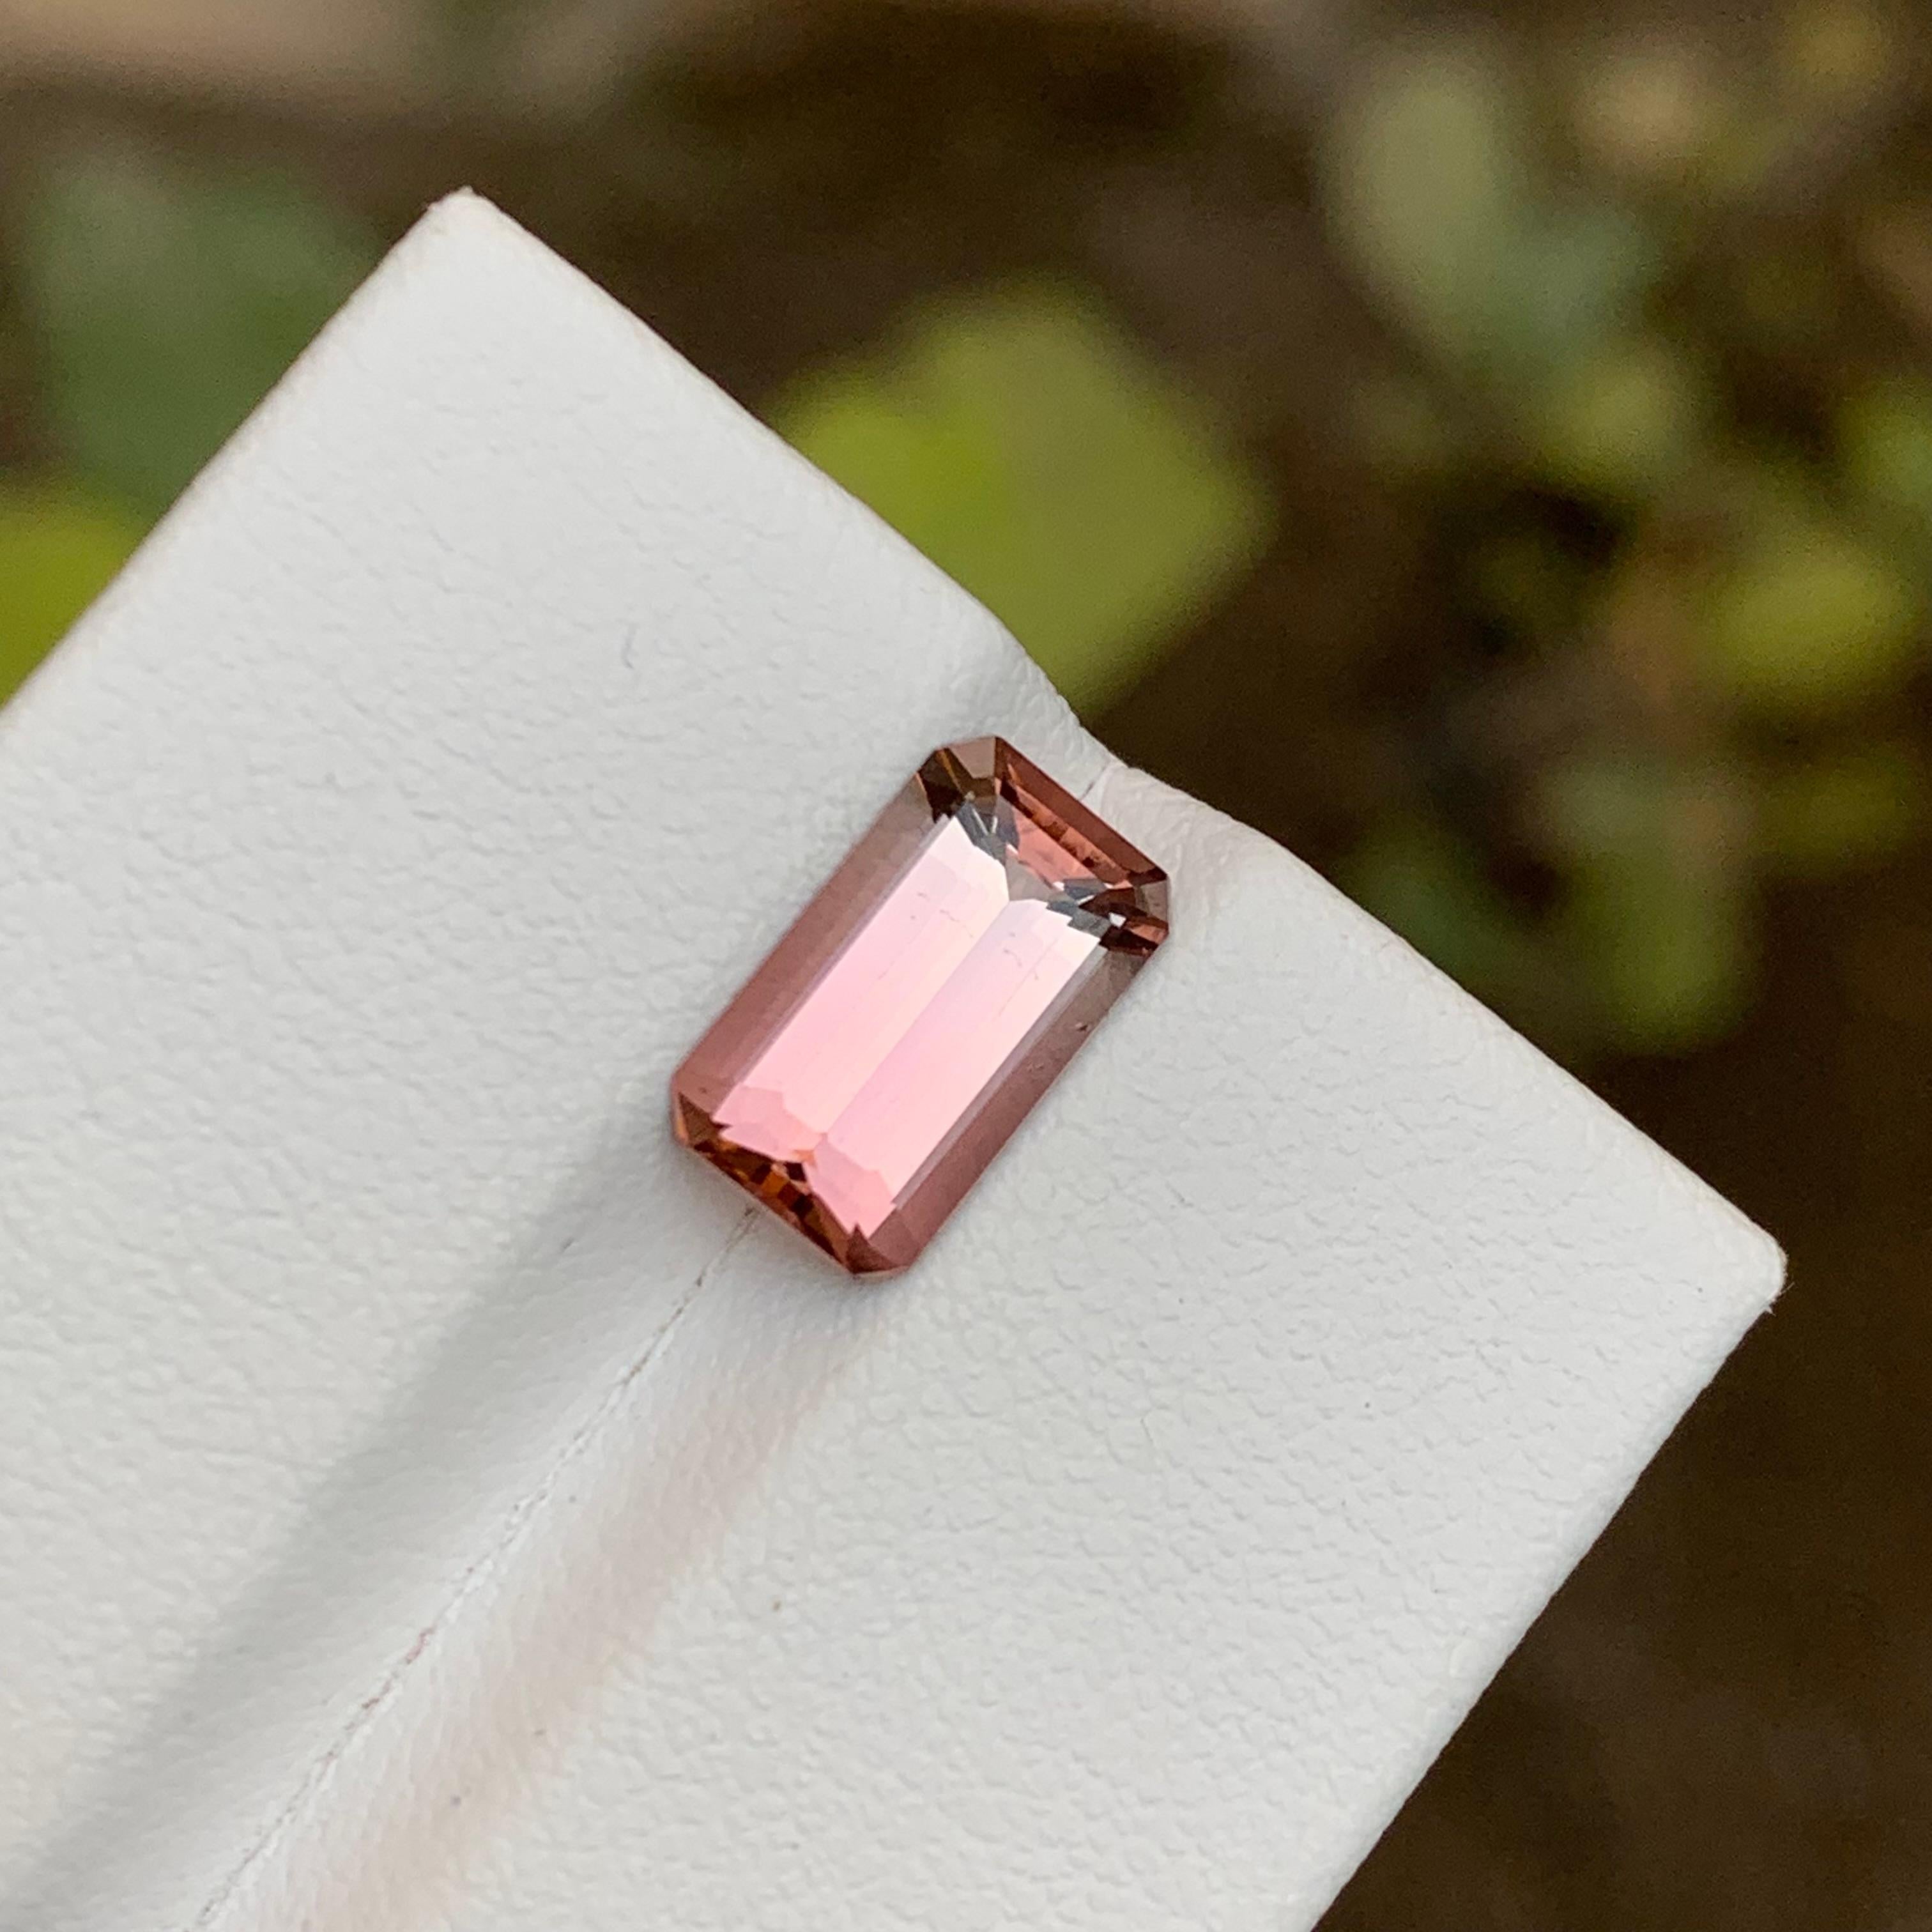 GEMSTONE TYPE: Tourmaline
PIECE(S): 1
WEIGHT: 2.45 Carats
SHAPE: Emerald
SIZE (MM):  10.74 x 6.23 x 4.47
COLOR: Pink
CLARITY: Approx 97% Eye Clean
TREATMENT: Heated
ORIGIN: Afghanistan
CERTIFICATE: On demand

Captivate hearts with this mesmerizing